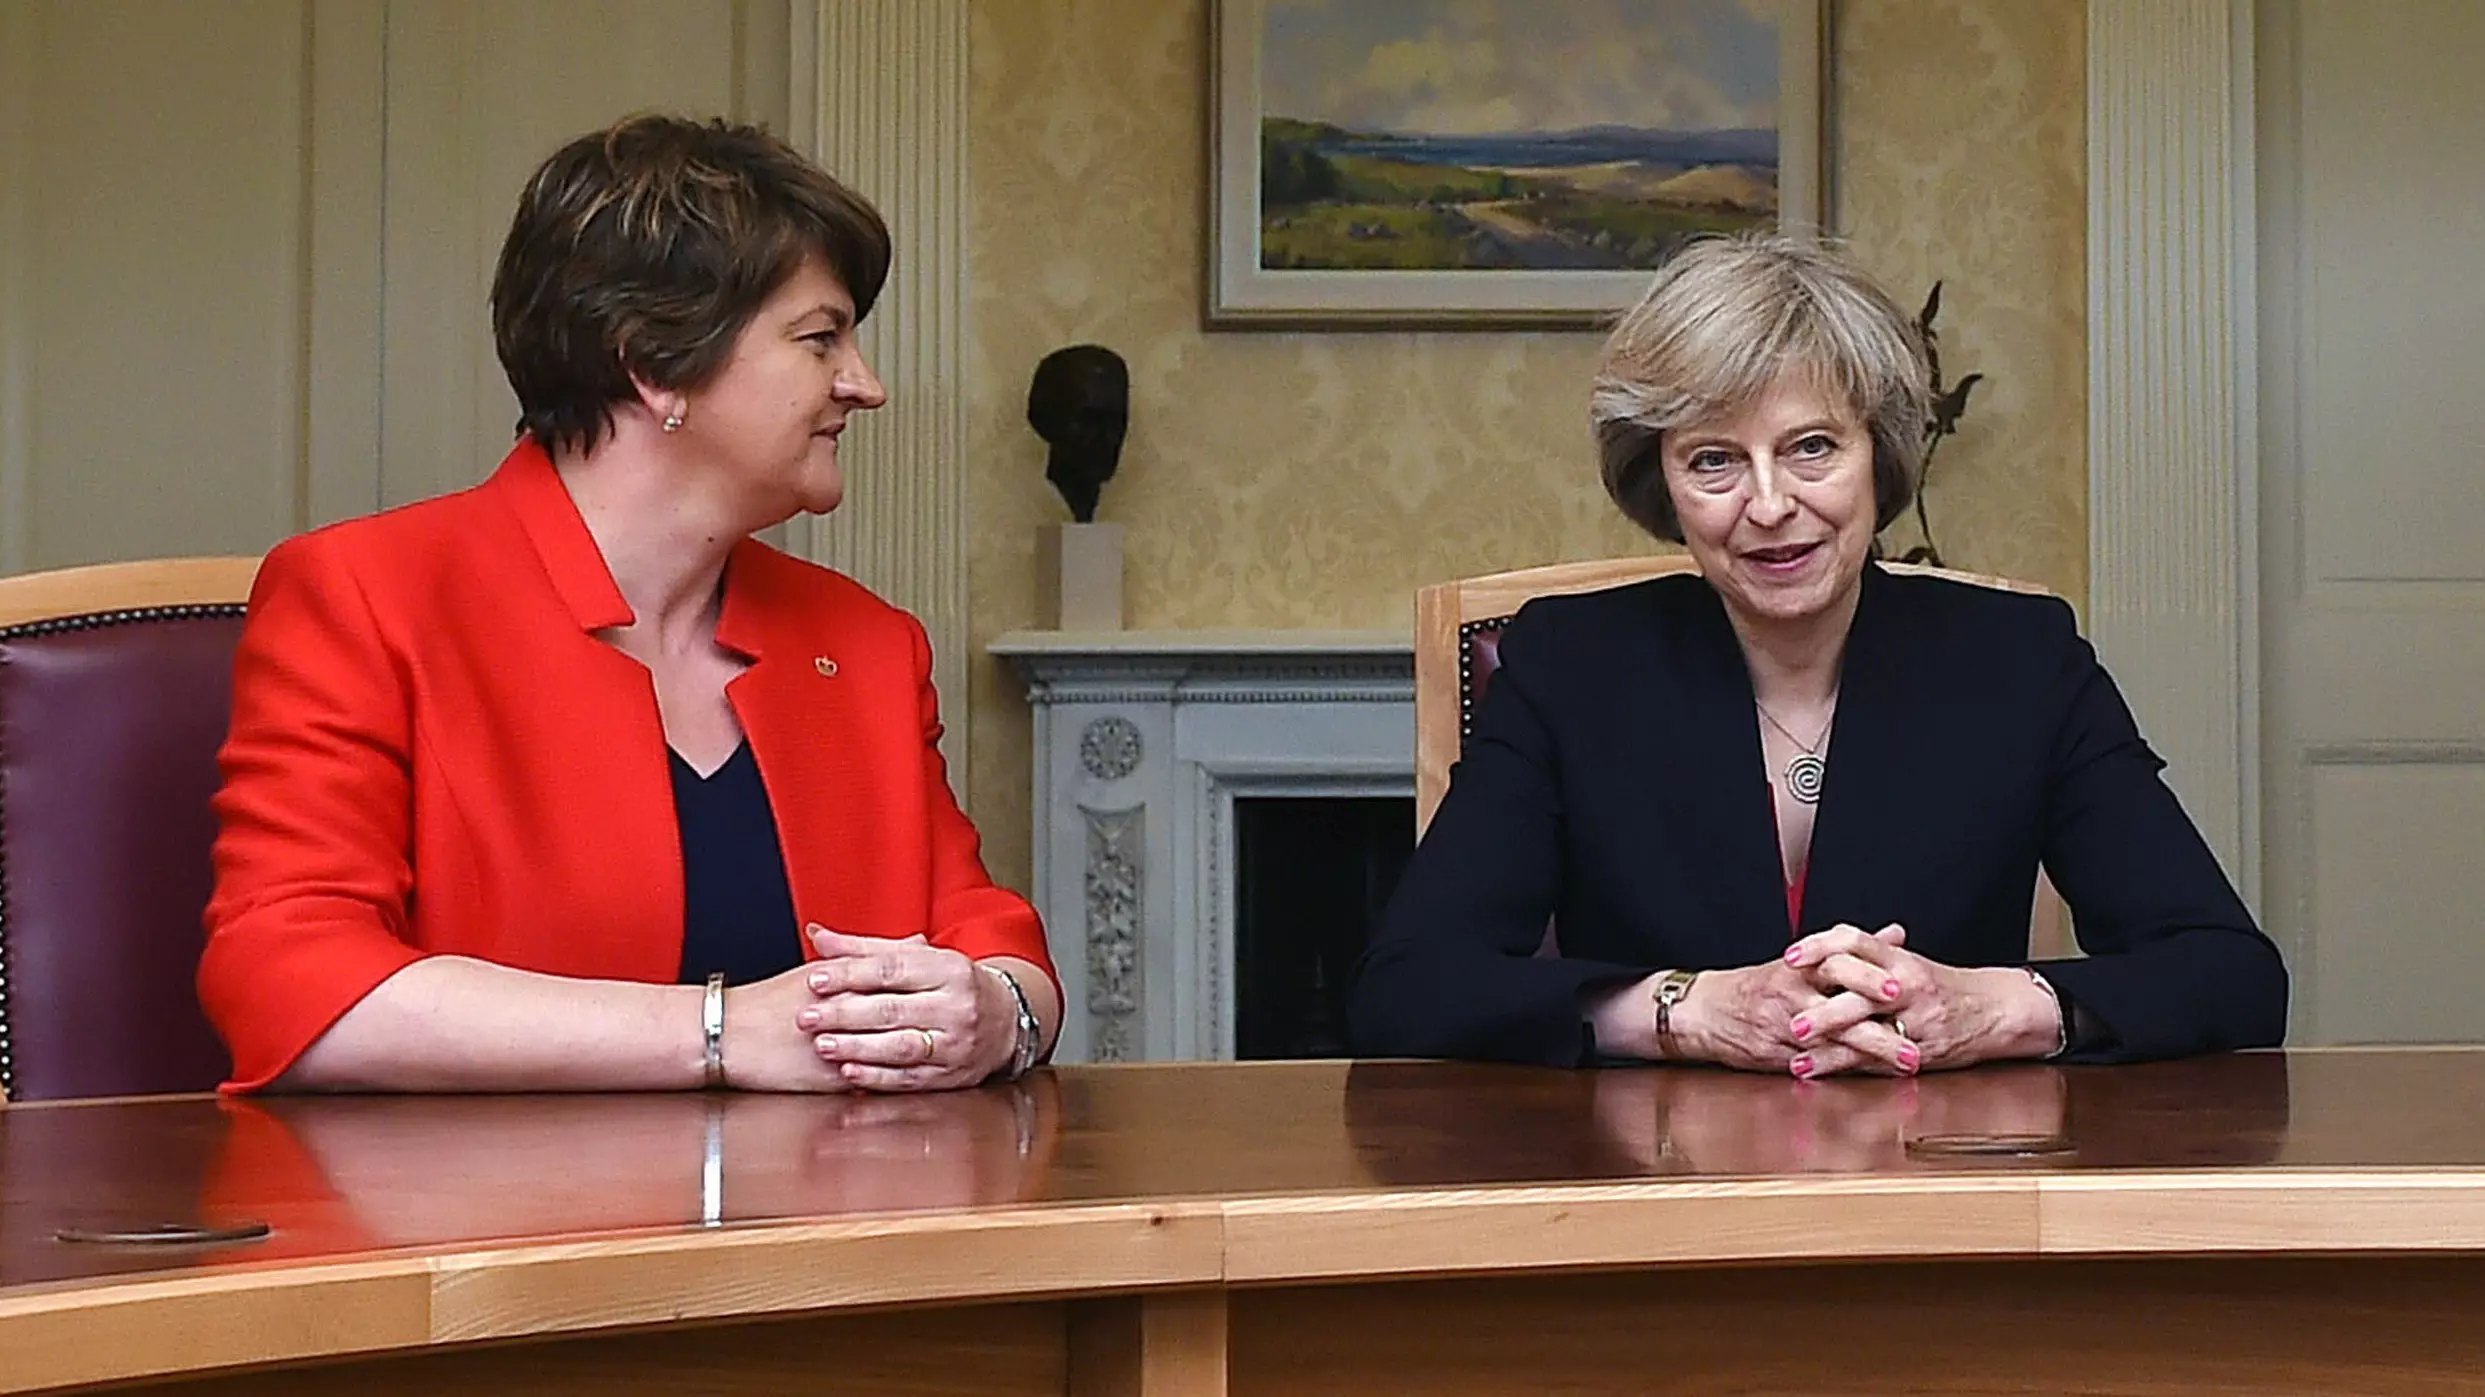 Theresa May To Form Coalition With DUP - But Who Are They?